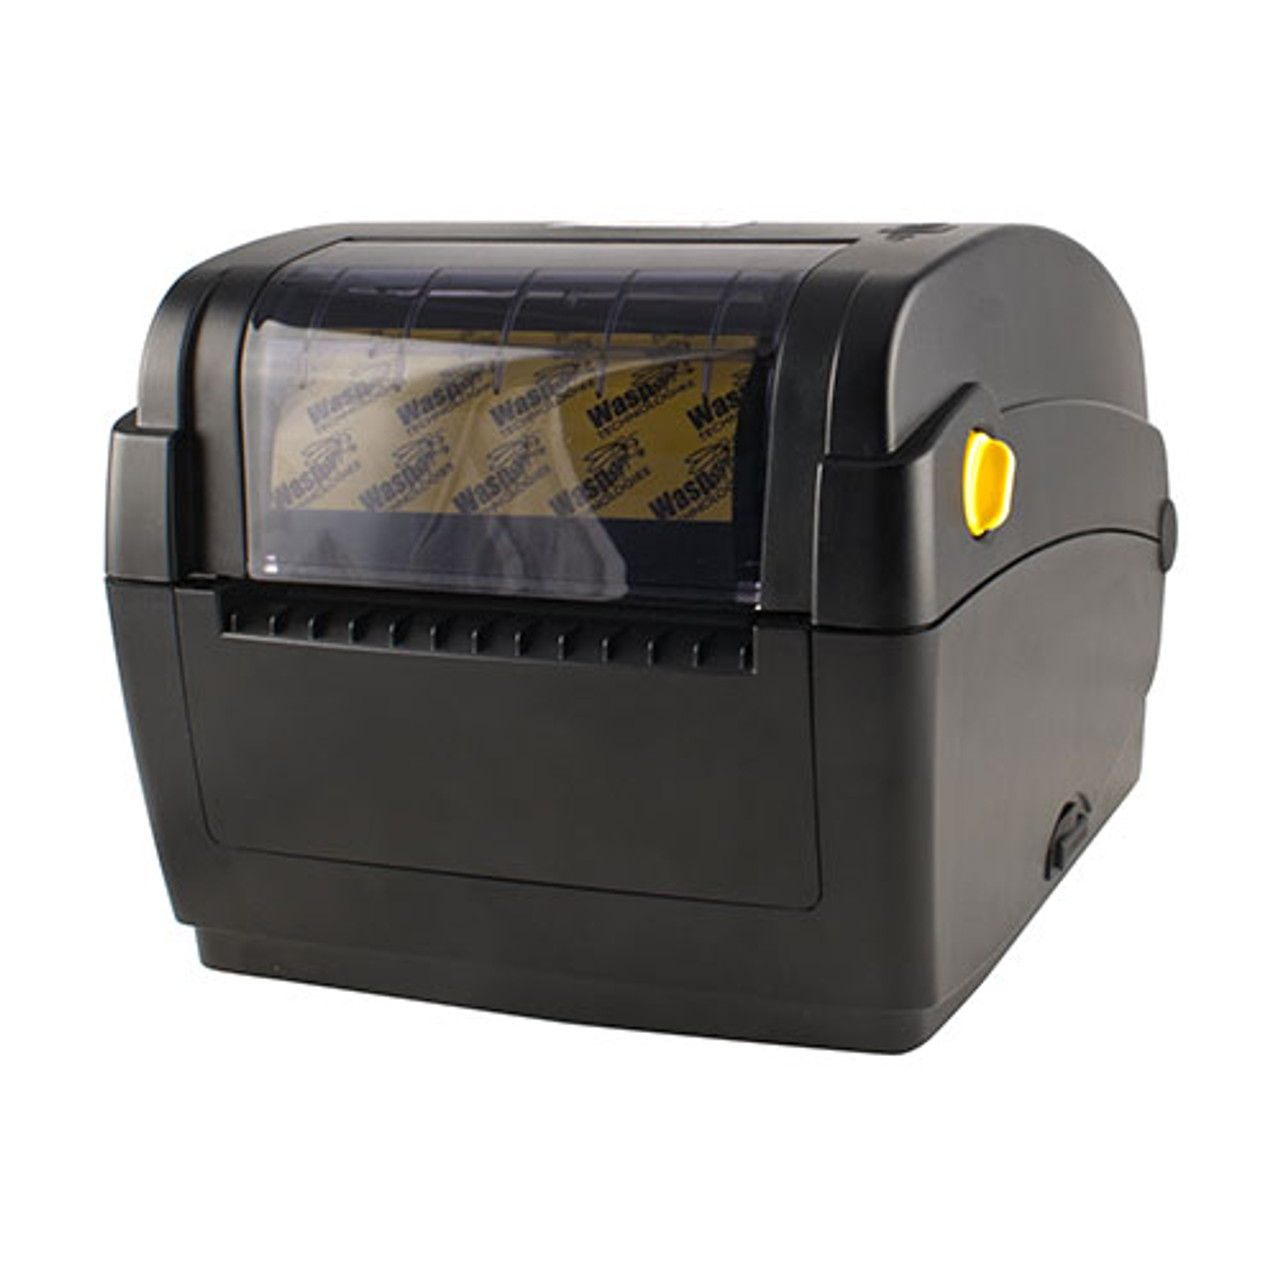 Barcode Label Printers, shipping label printers and thermal label